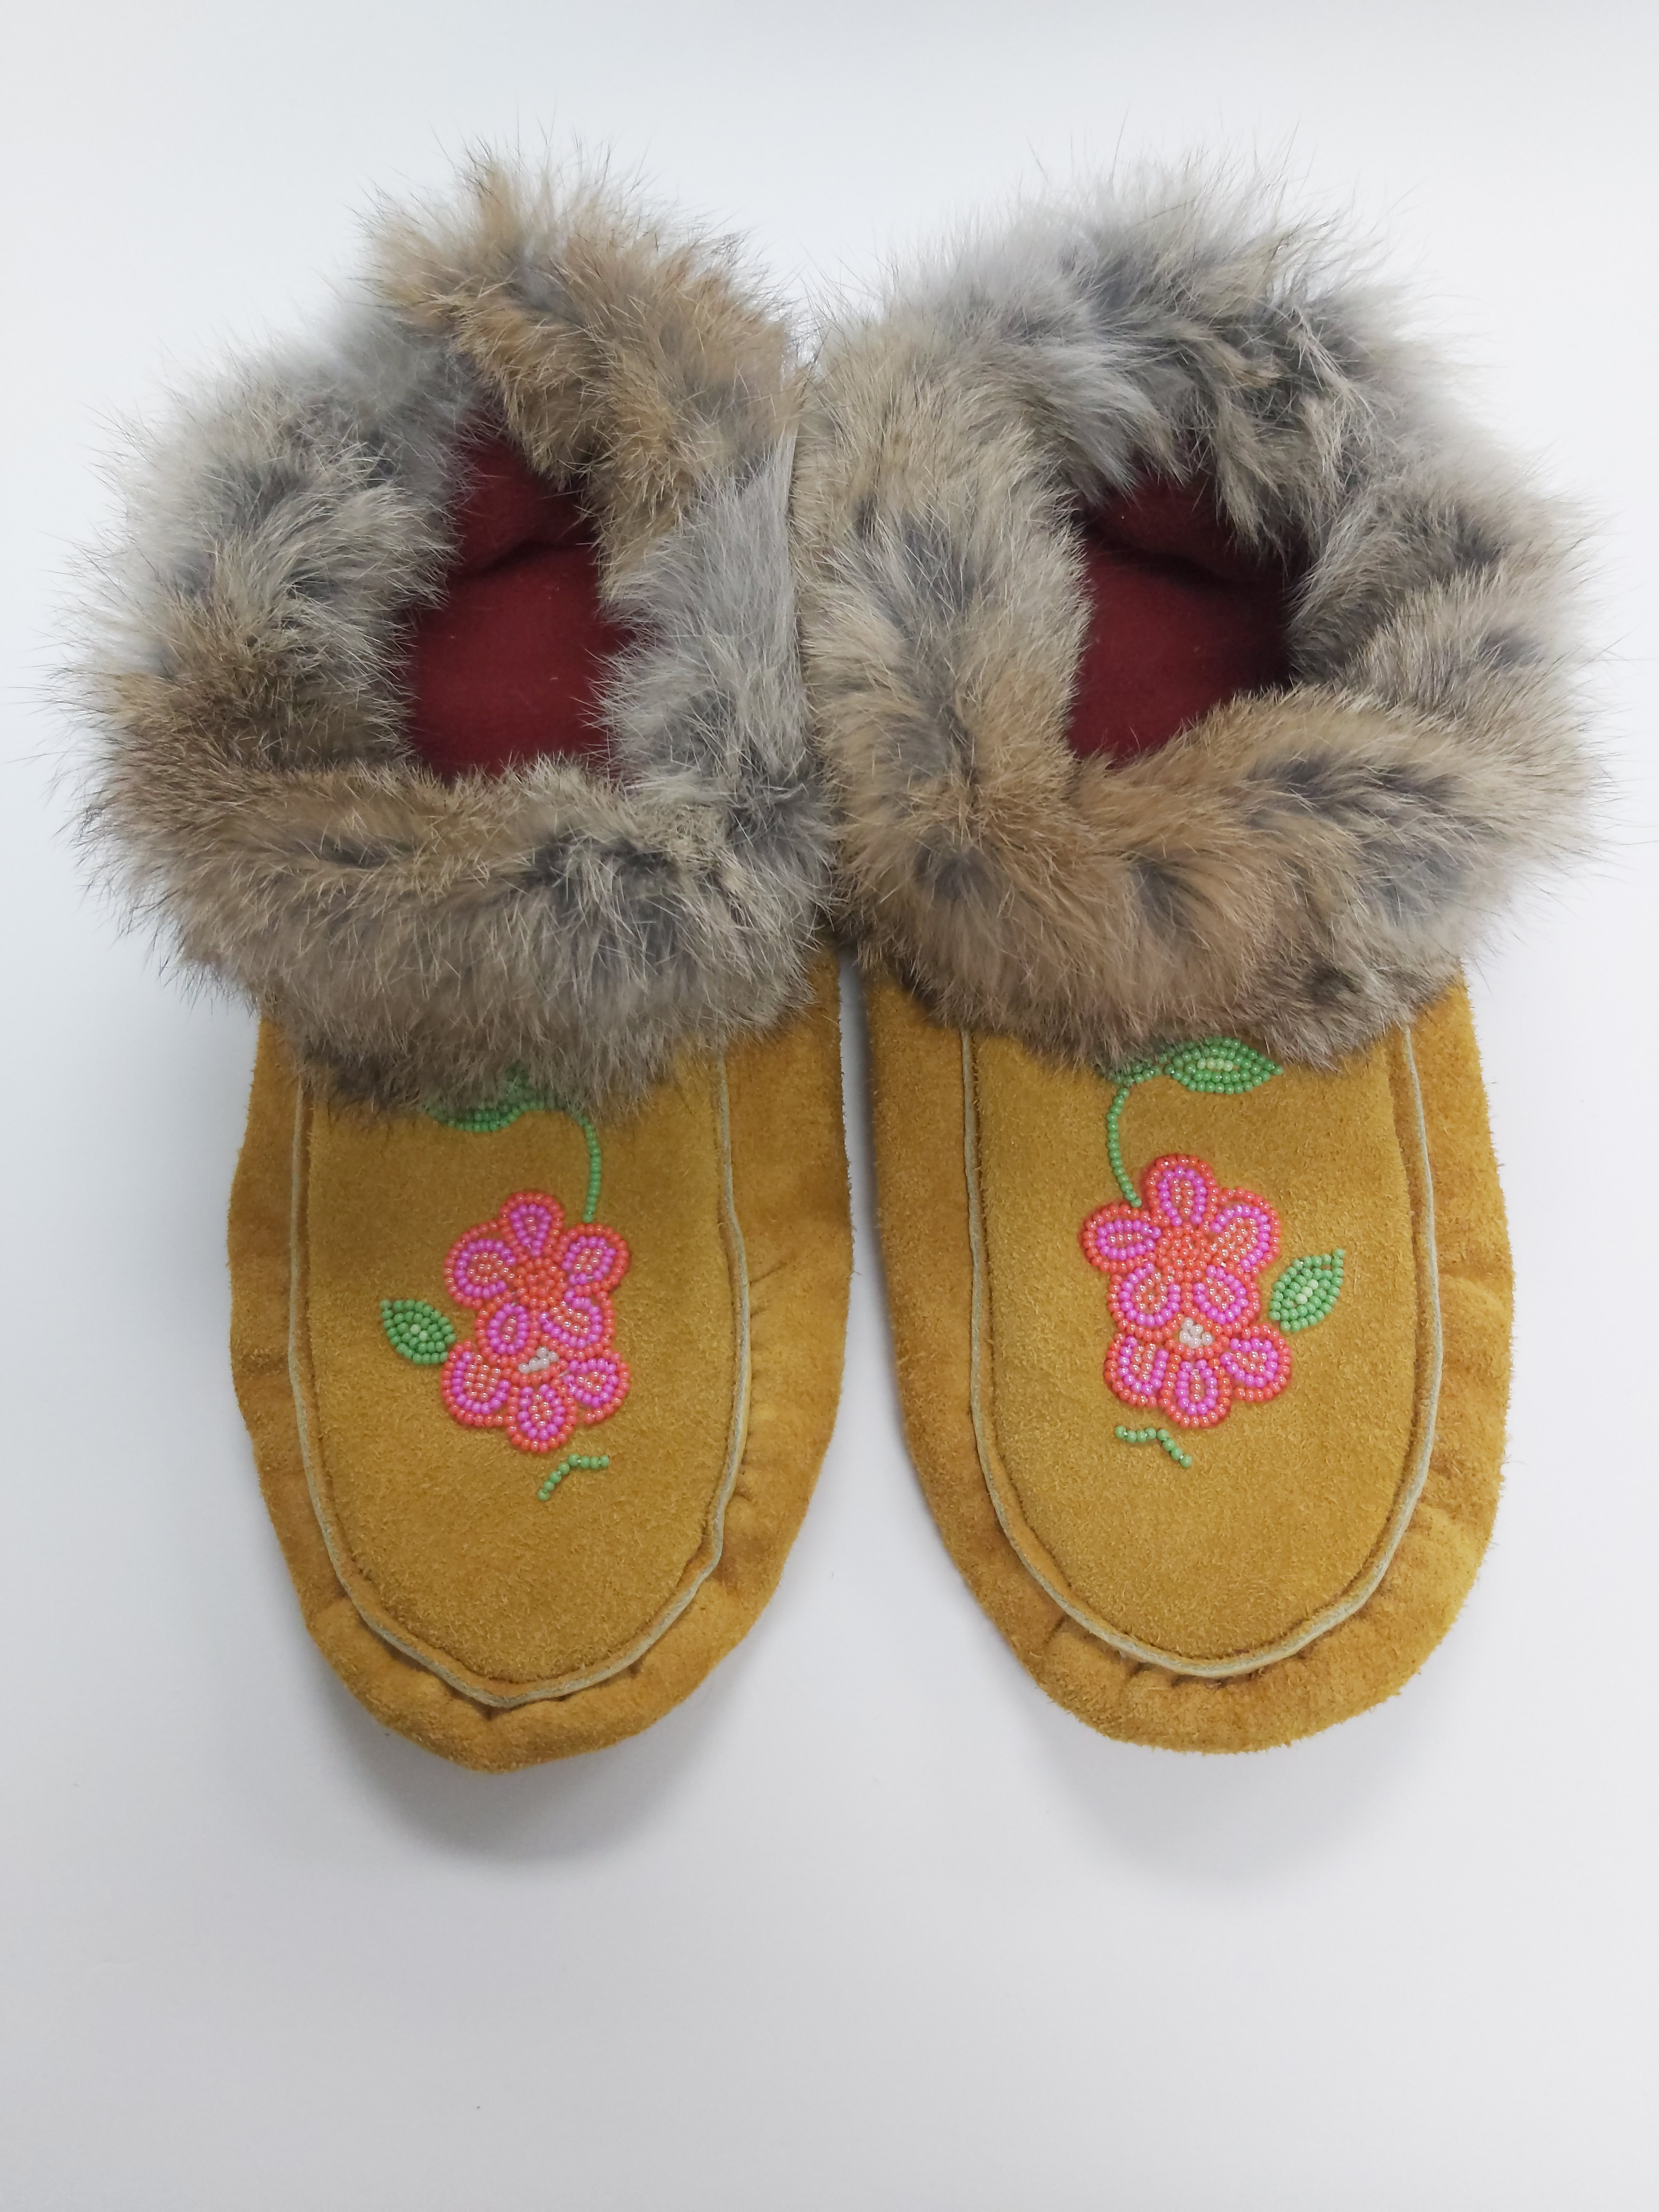 Details about   NATIVE AMERICAN BEADED CHILDRENS MOCCASINS  5 INCHES WITH FUR 